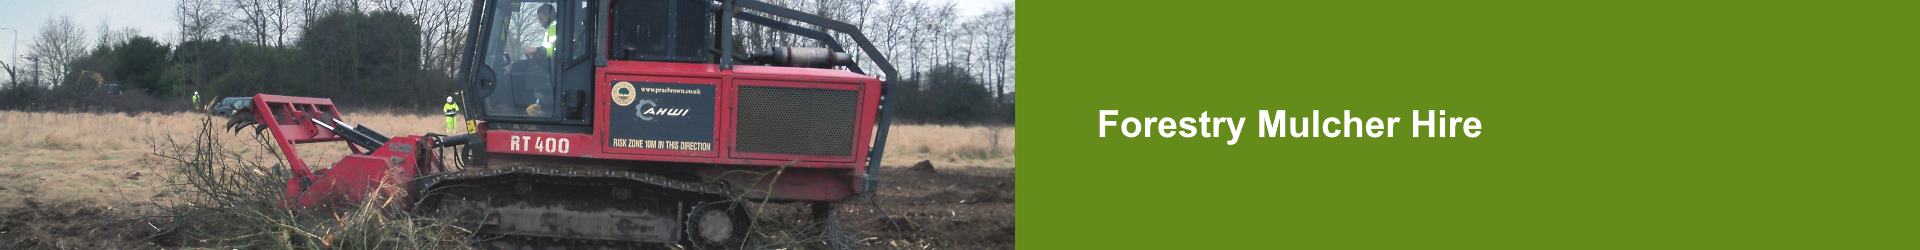 Vegetation Clearance and Mulcher Hire Service Burton on Trent and The Midlands